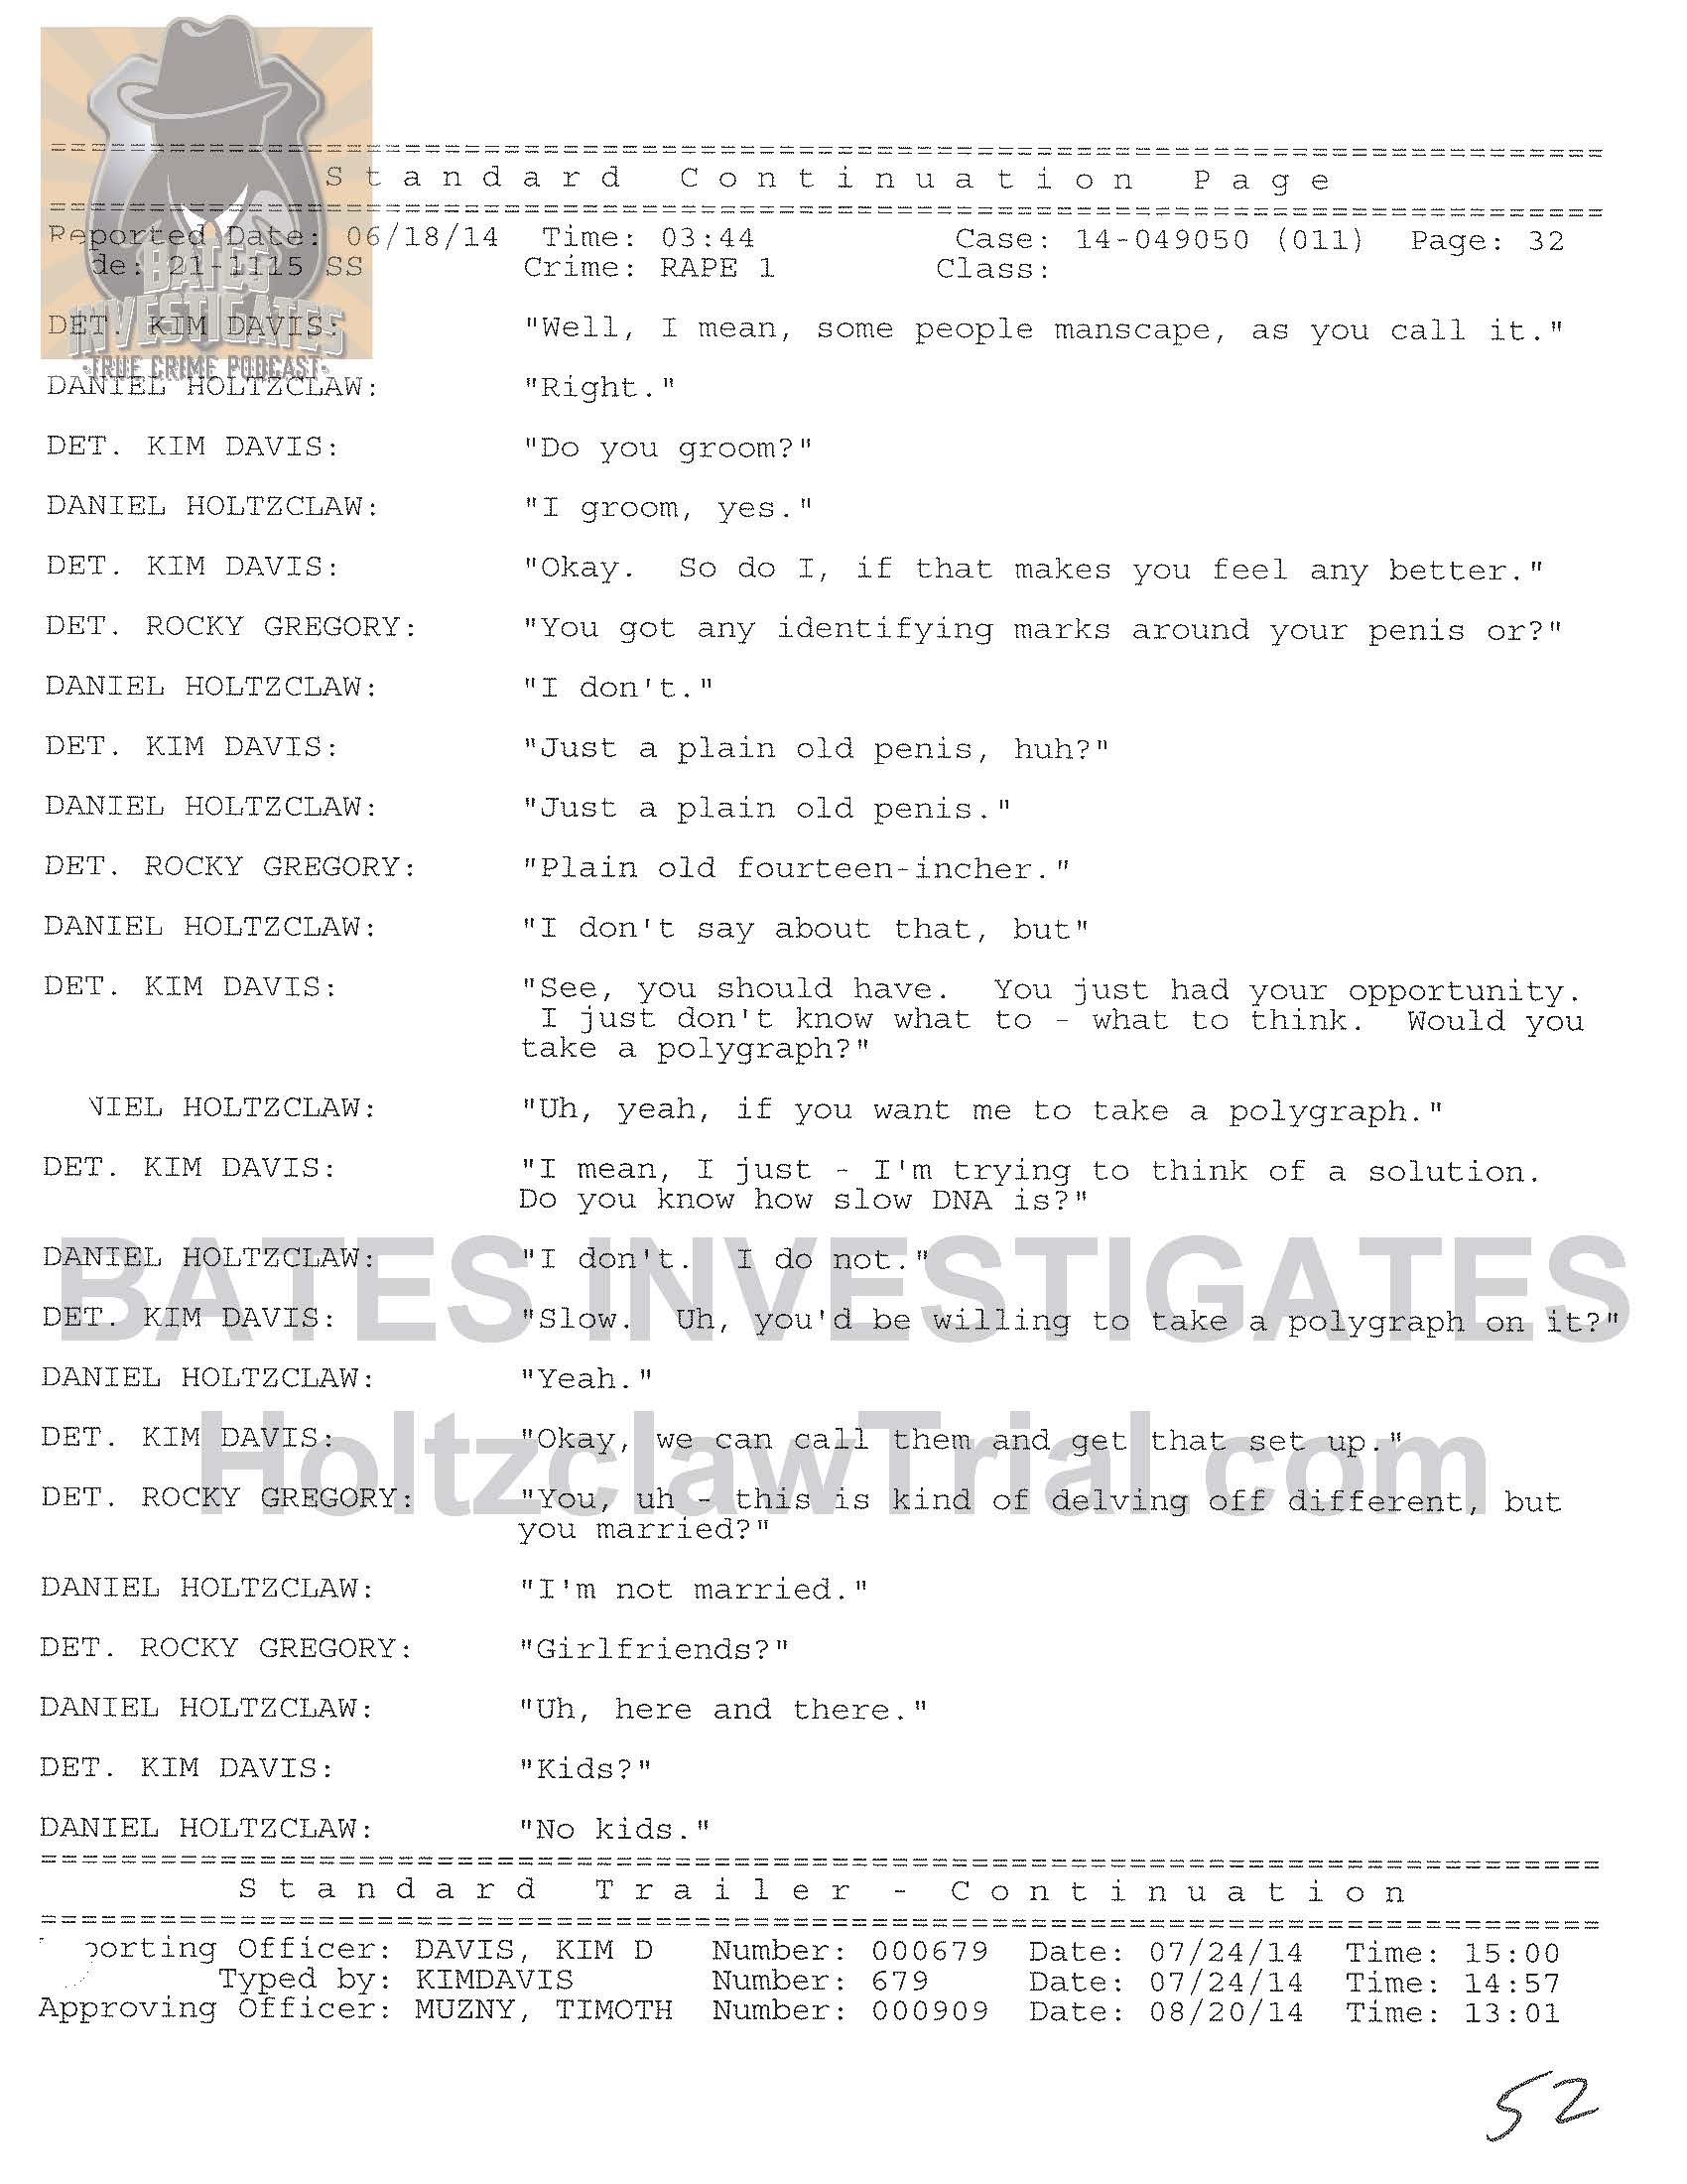 Holtzclaw Interrogation Transcript - Ep02 Redacted_Page_32.jpg